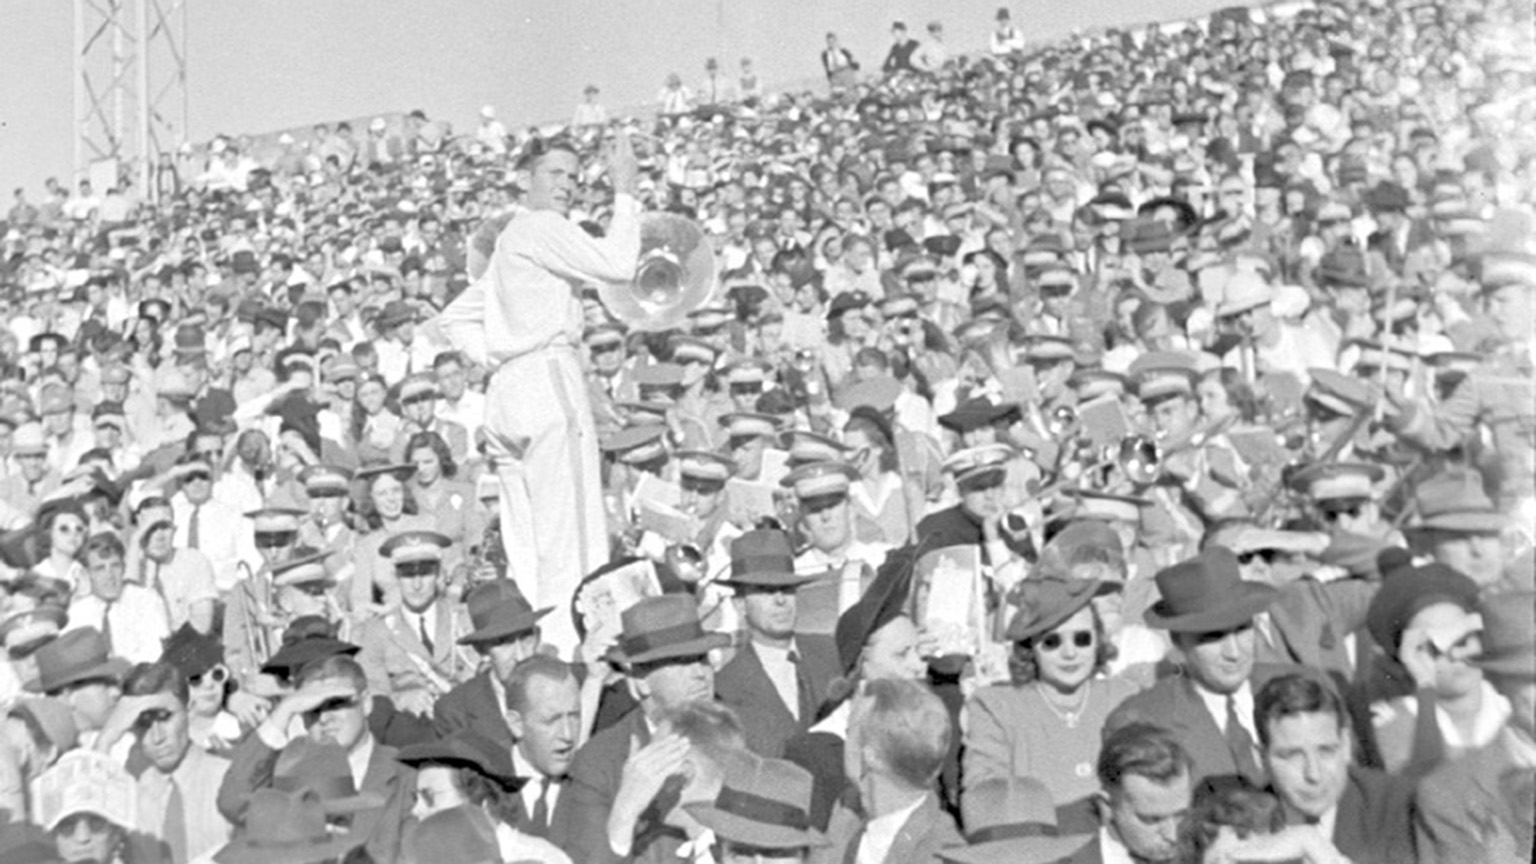 A shot of the crowd at a football game in the 40s.